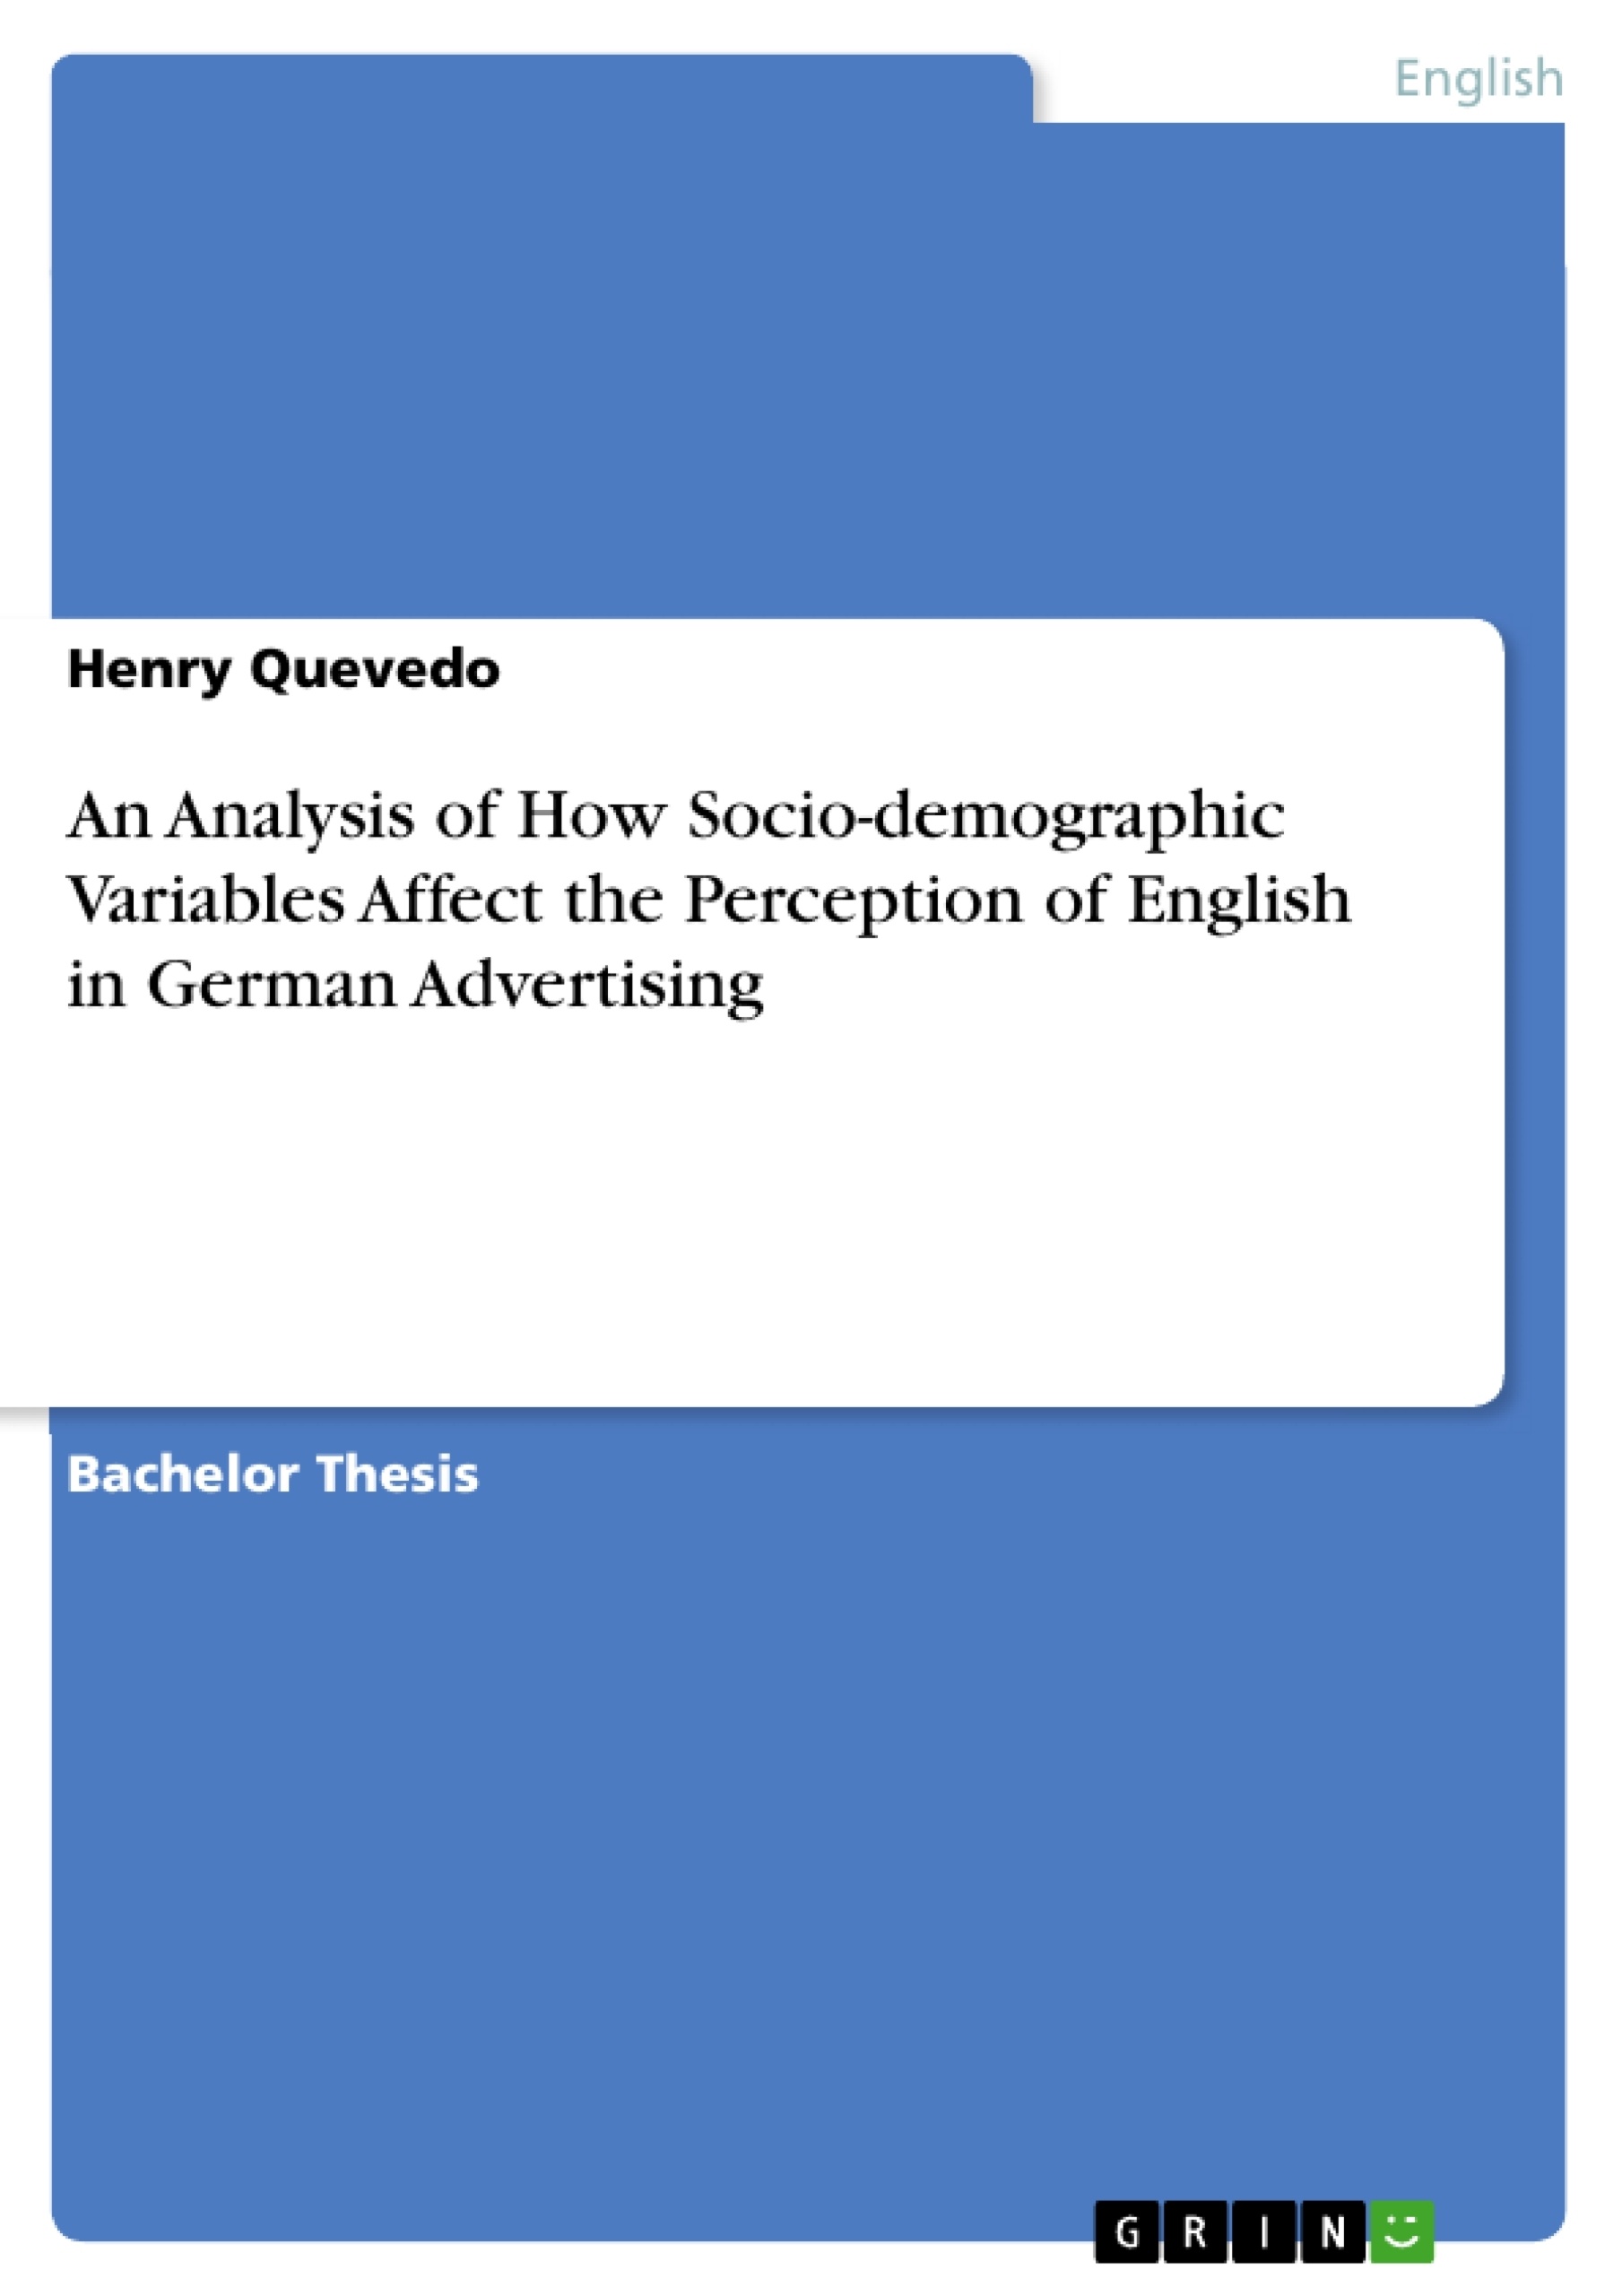 Title: An Analysis of How Socio-demographic Variables Affect the Perception of English in German Advertising